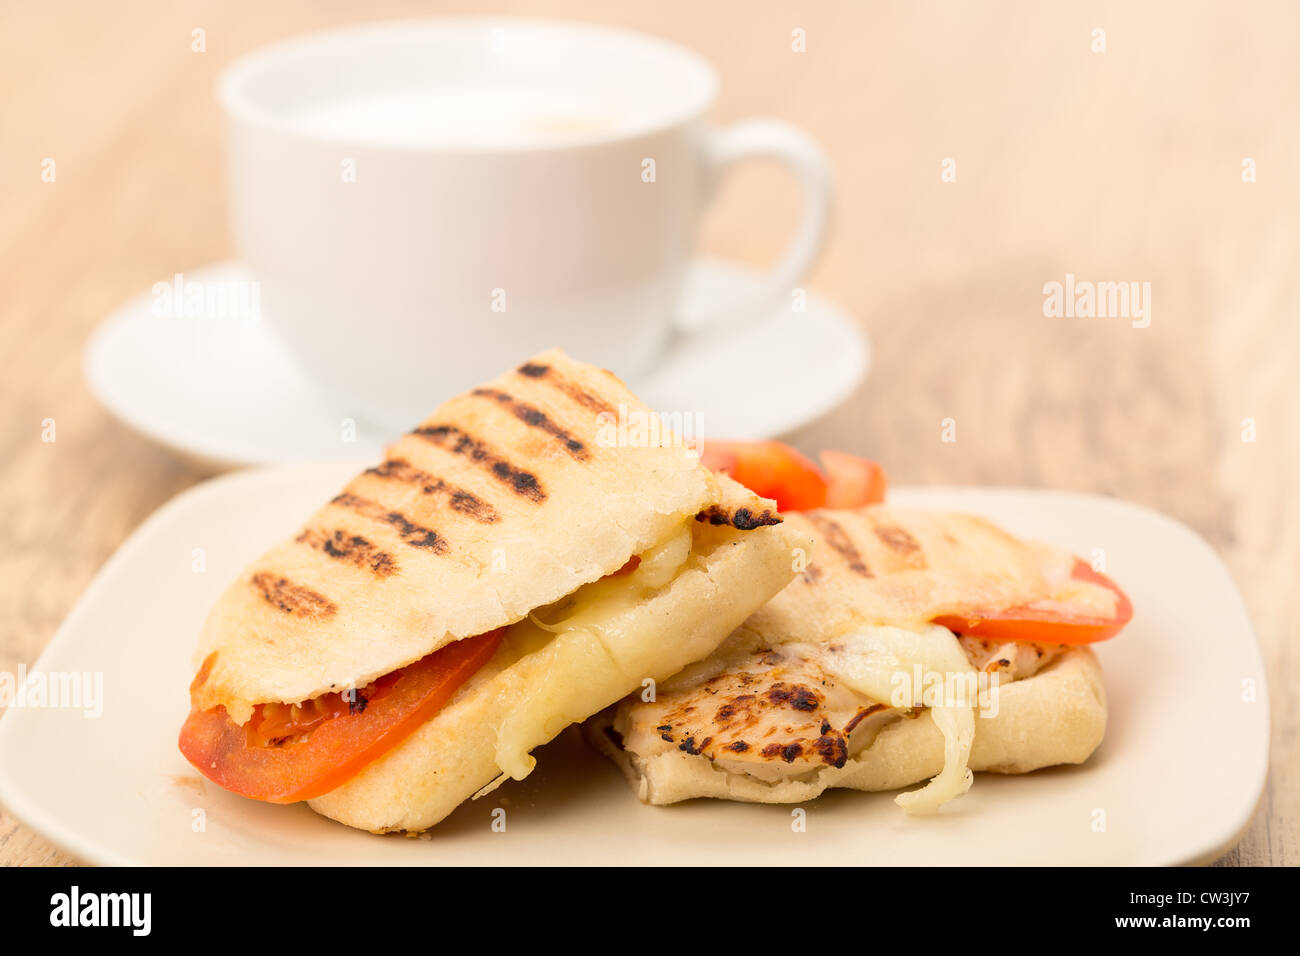 Toasted Chicken, tomato and mozzarella Panini sandwich that has been cut in half and placed on a plate Stock Photo